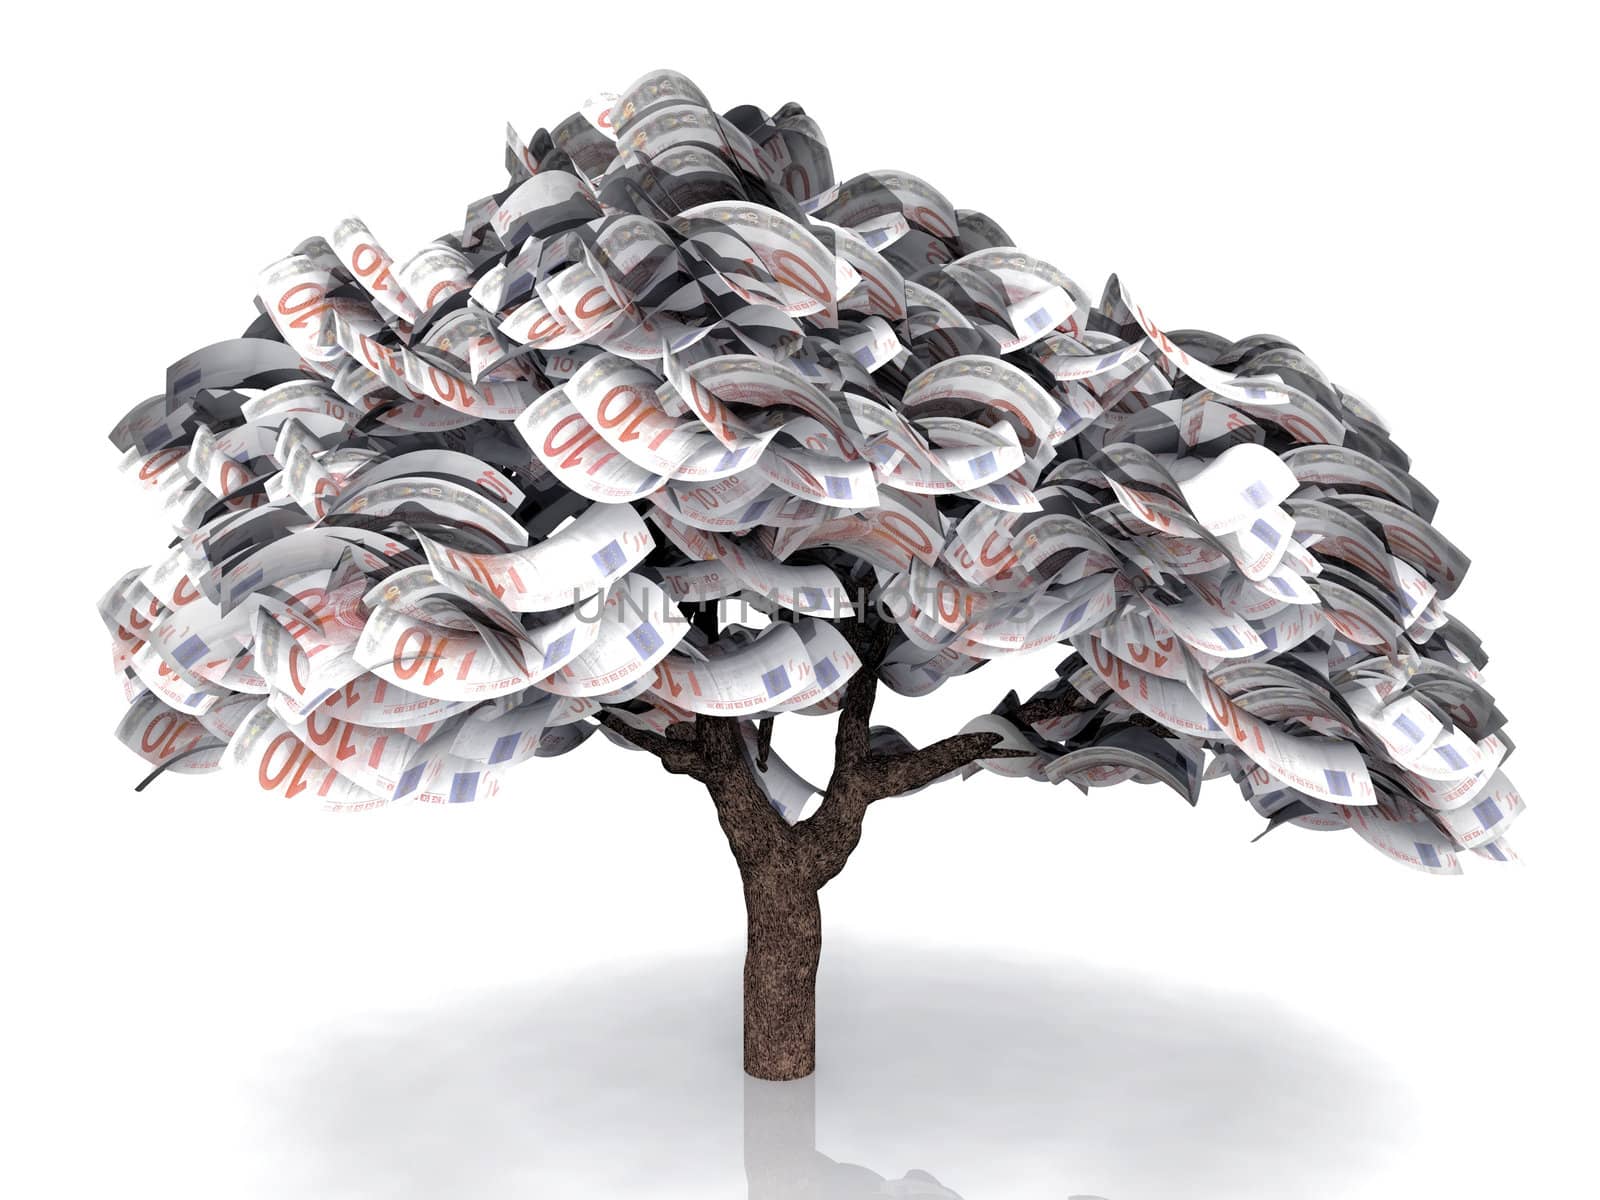 the tree with euro banknotes